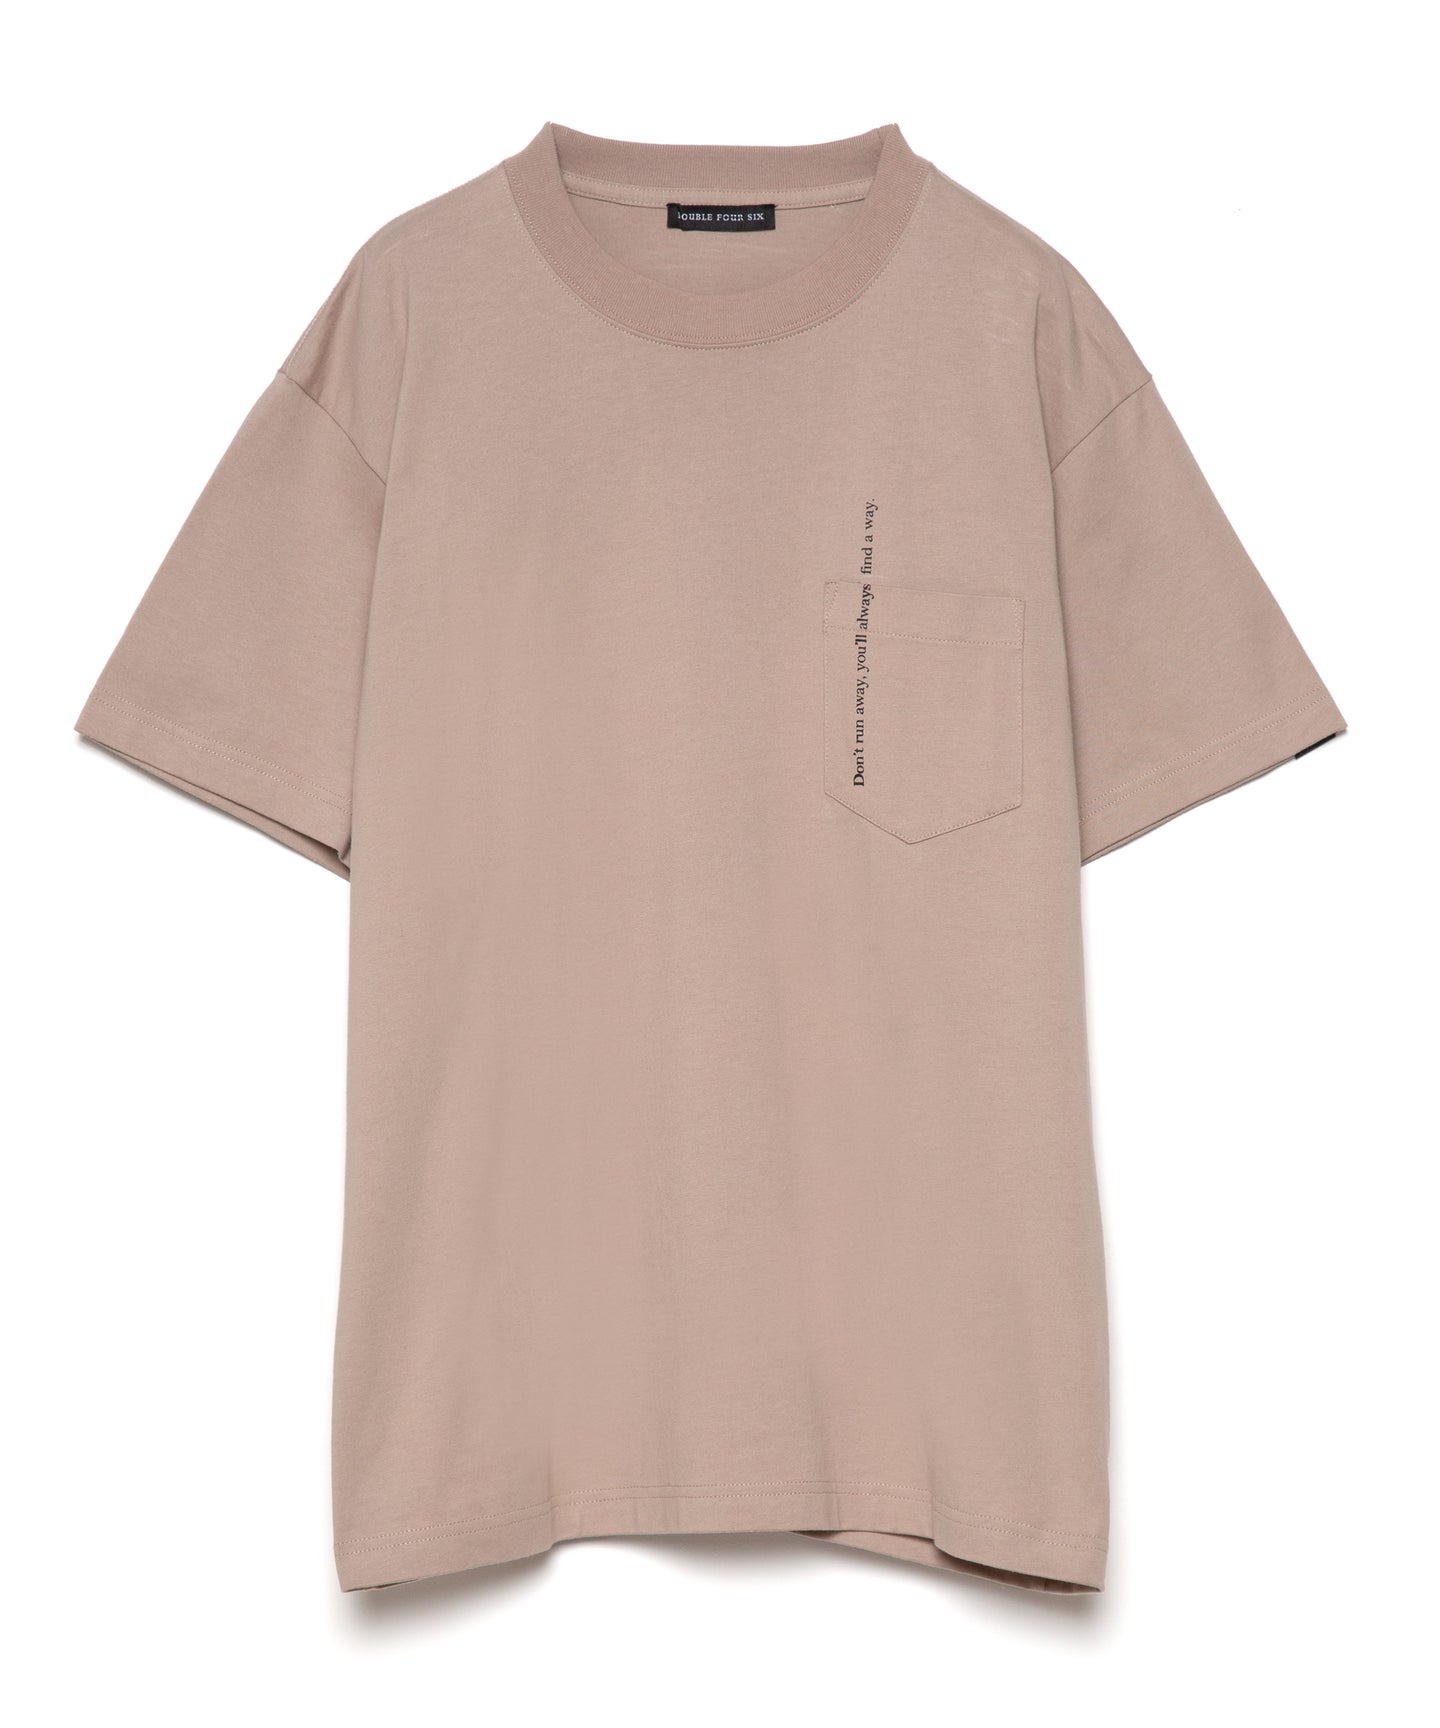 Message Print With Pocket T-shirt	Beige